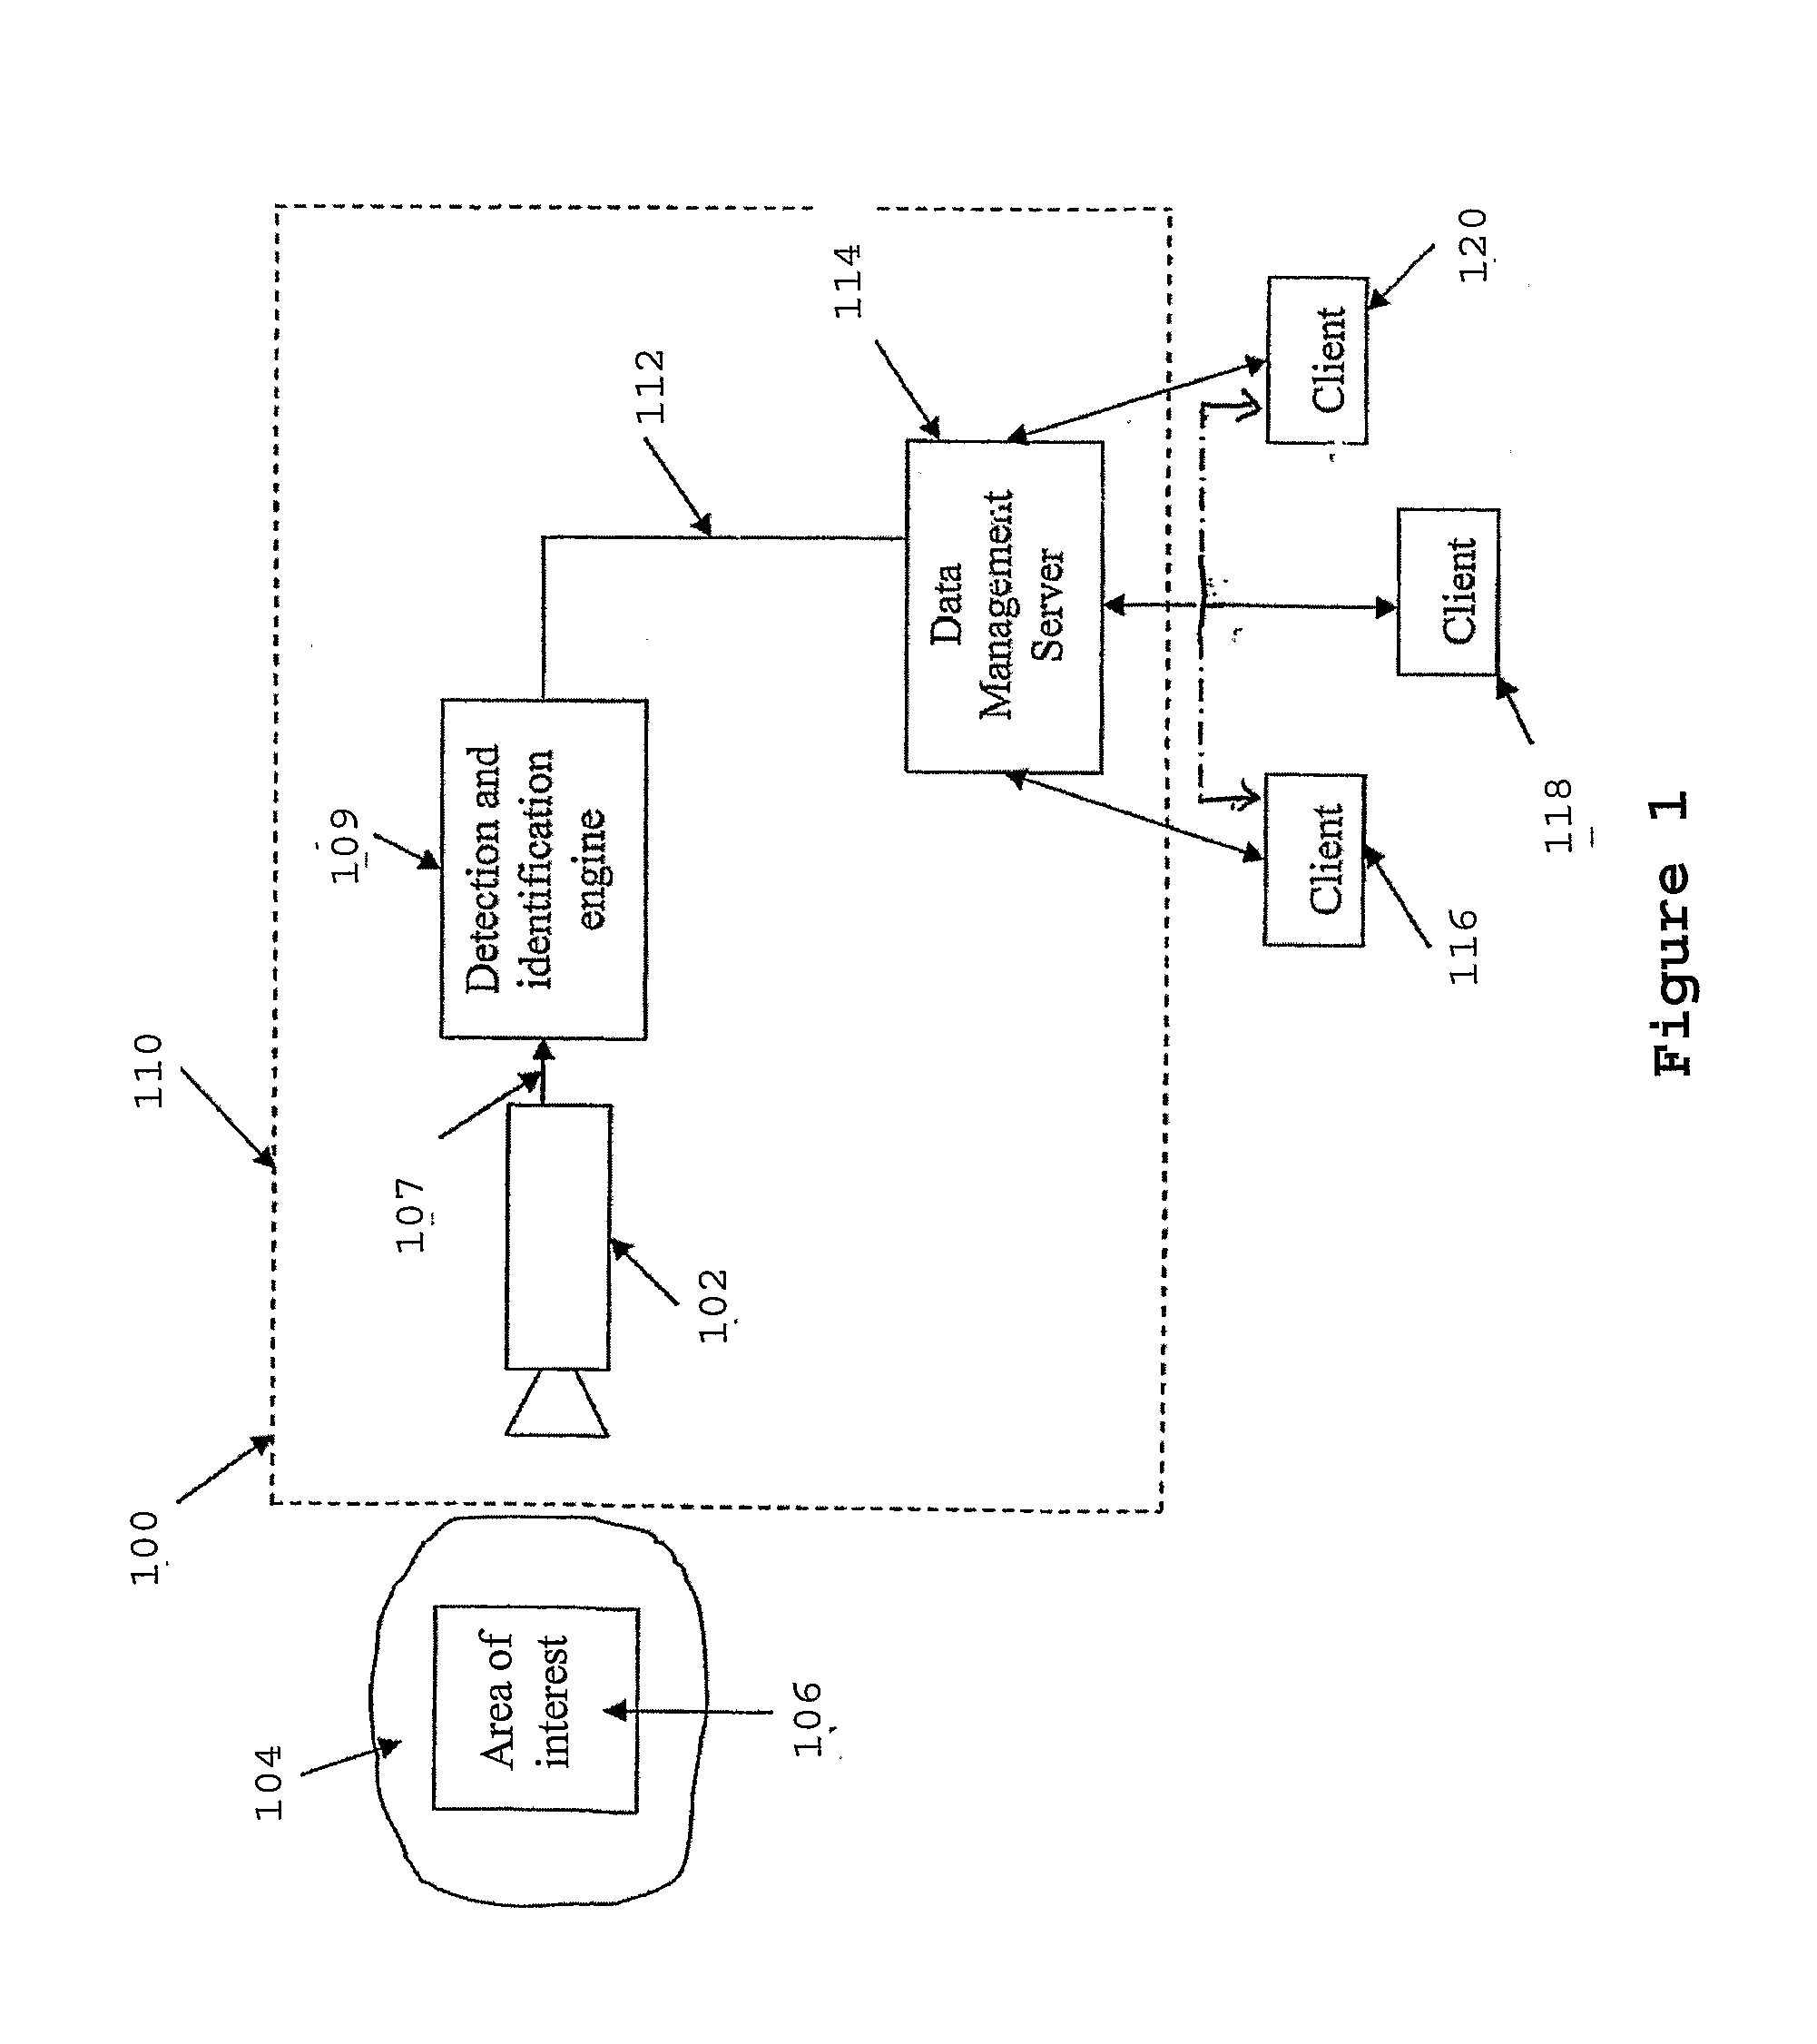 System and method for electronic surveillance